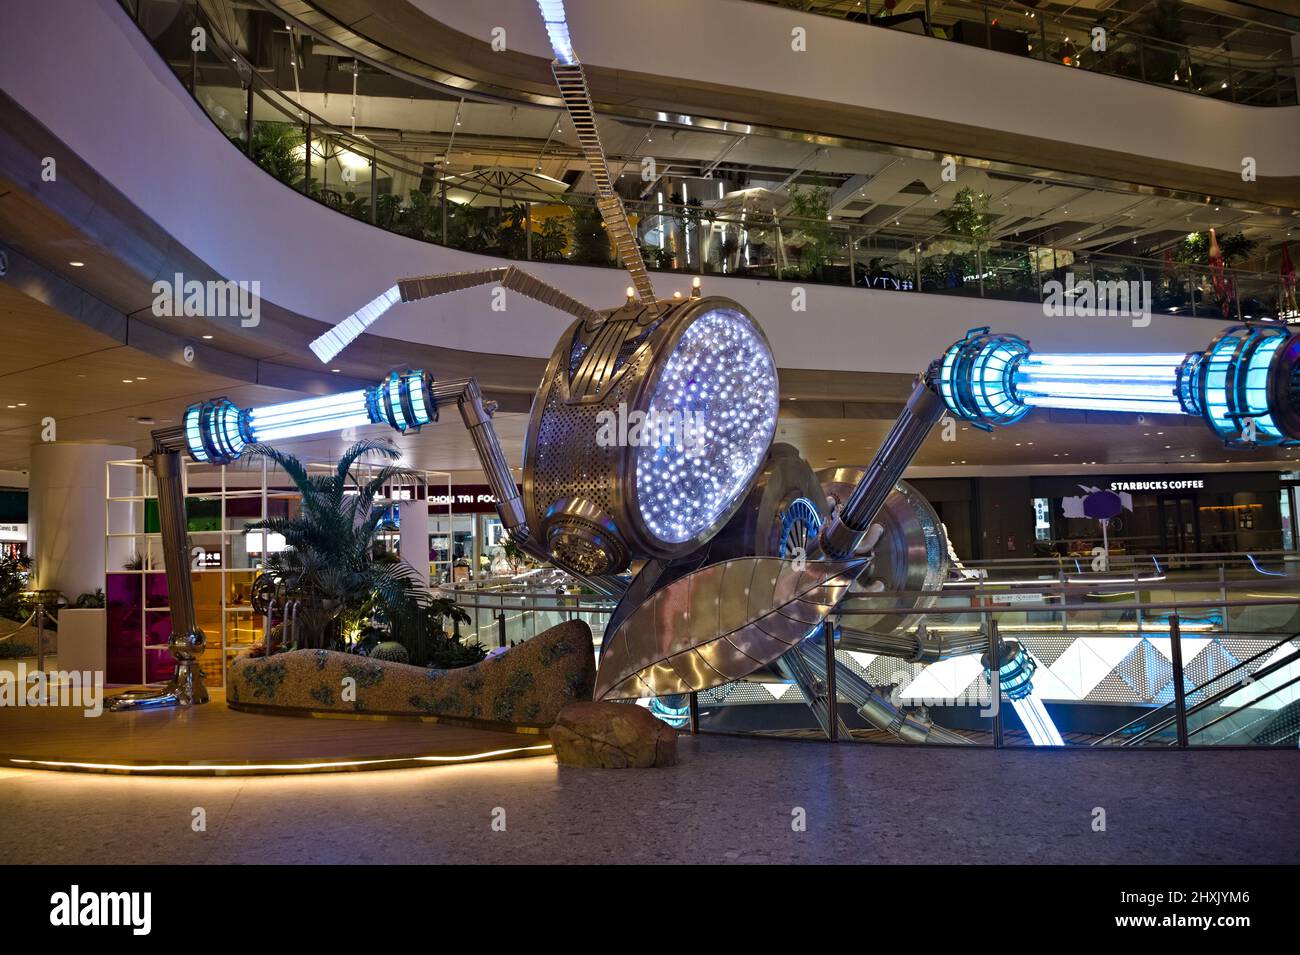 Trendy shopping center with large insect robot sculpture in Mainland China Stock Photo